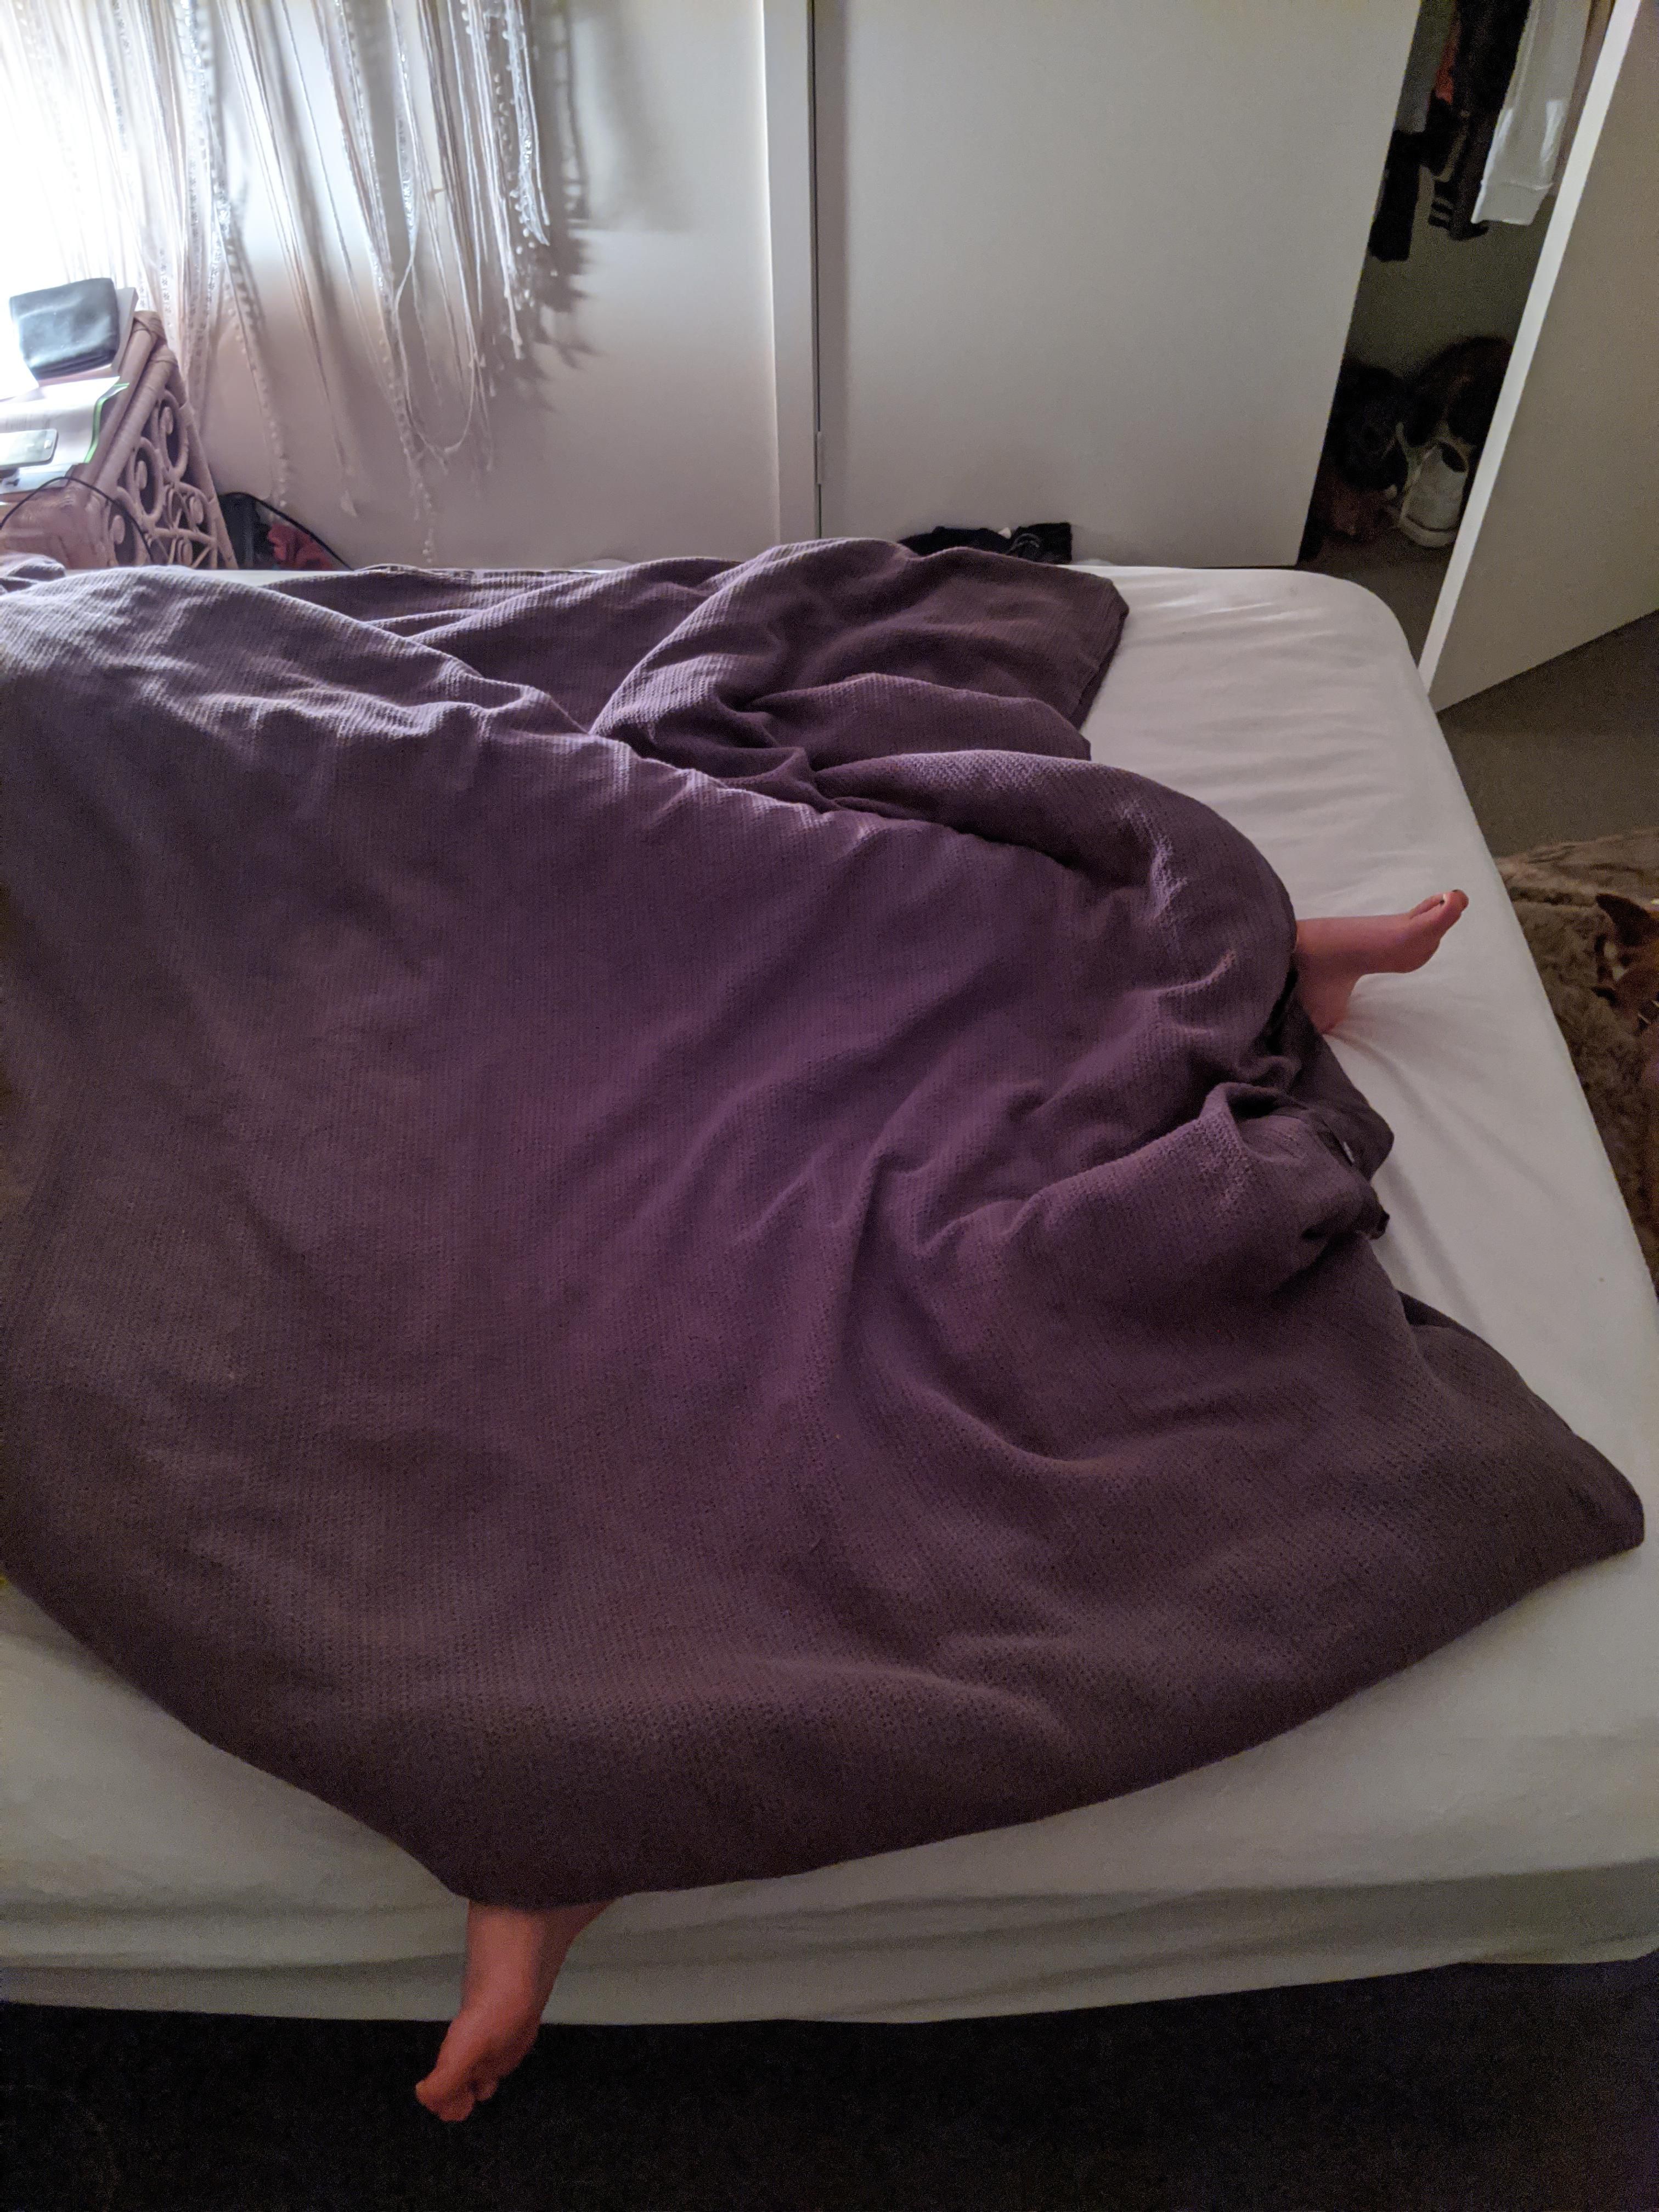 My girlfriend says she doesn't take up that much room in bed. I walked into the room last night and she was sleeping like this